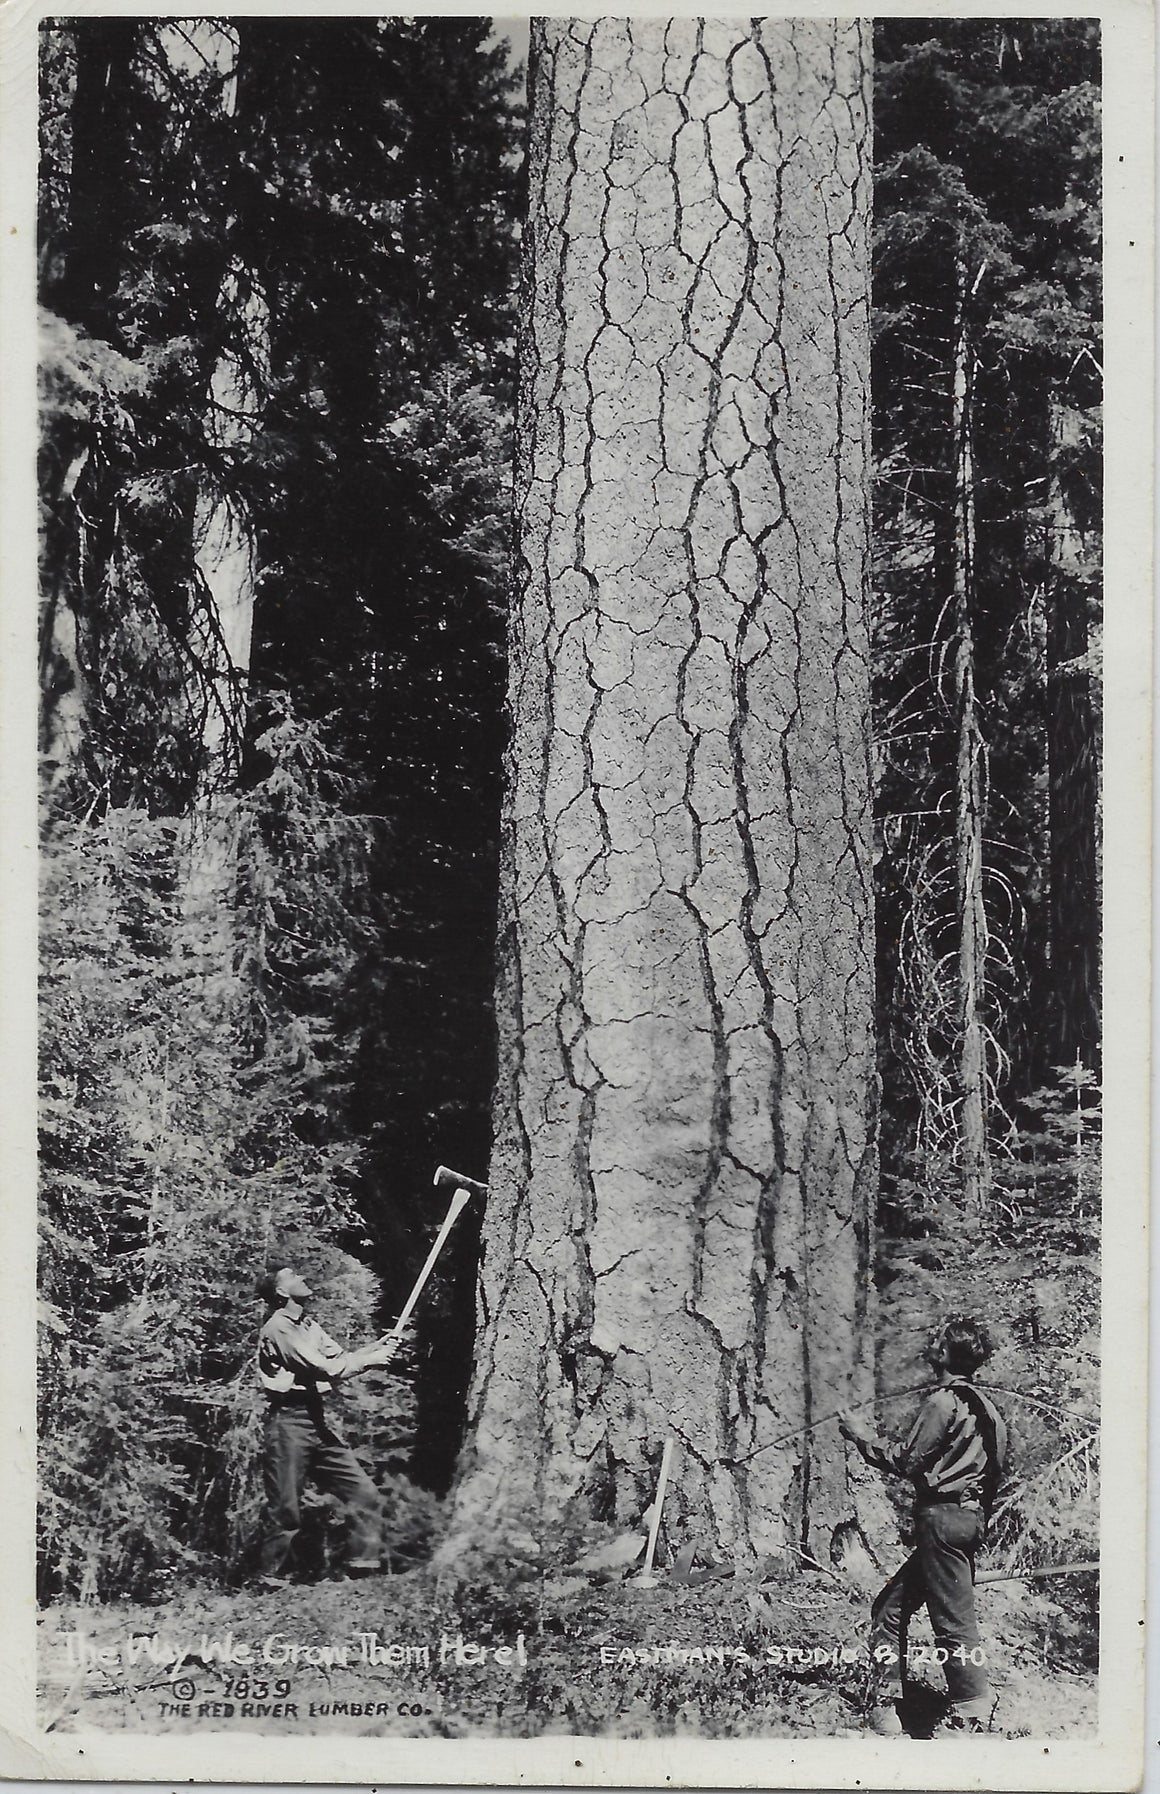 RPPC Real Photo California Loggers 1939 Red River Lumber Co Man Chopping Down Giant Redwood Image by Photographer Jervie H Eastman